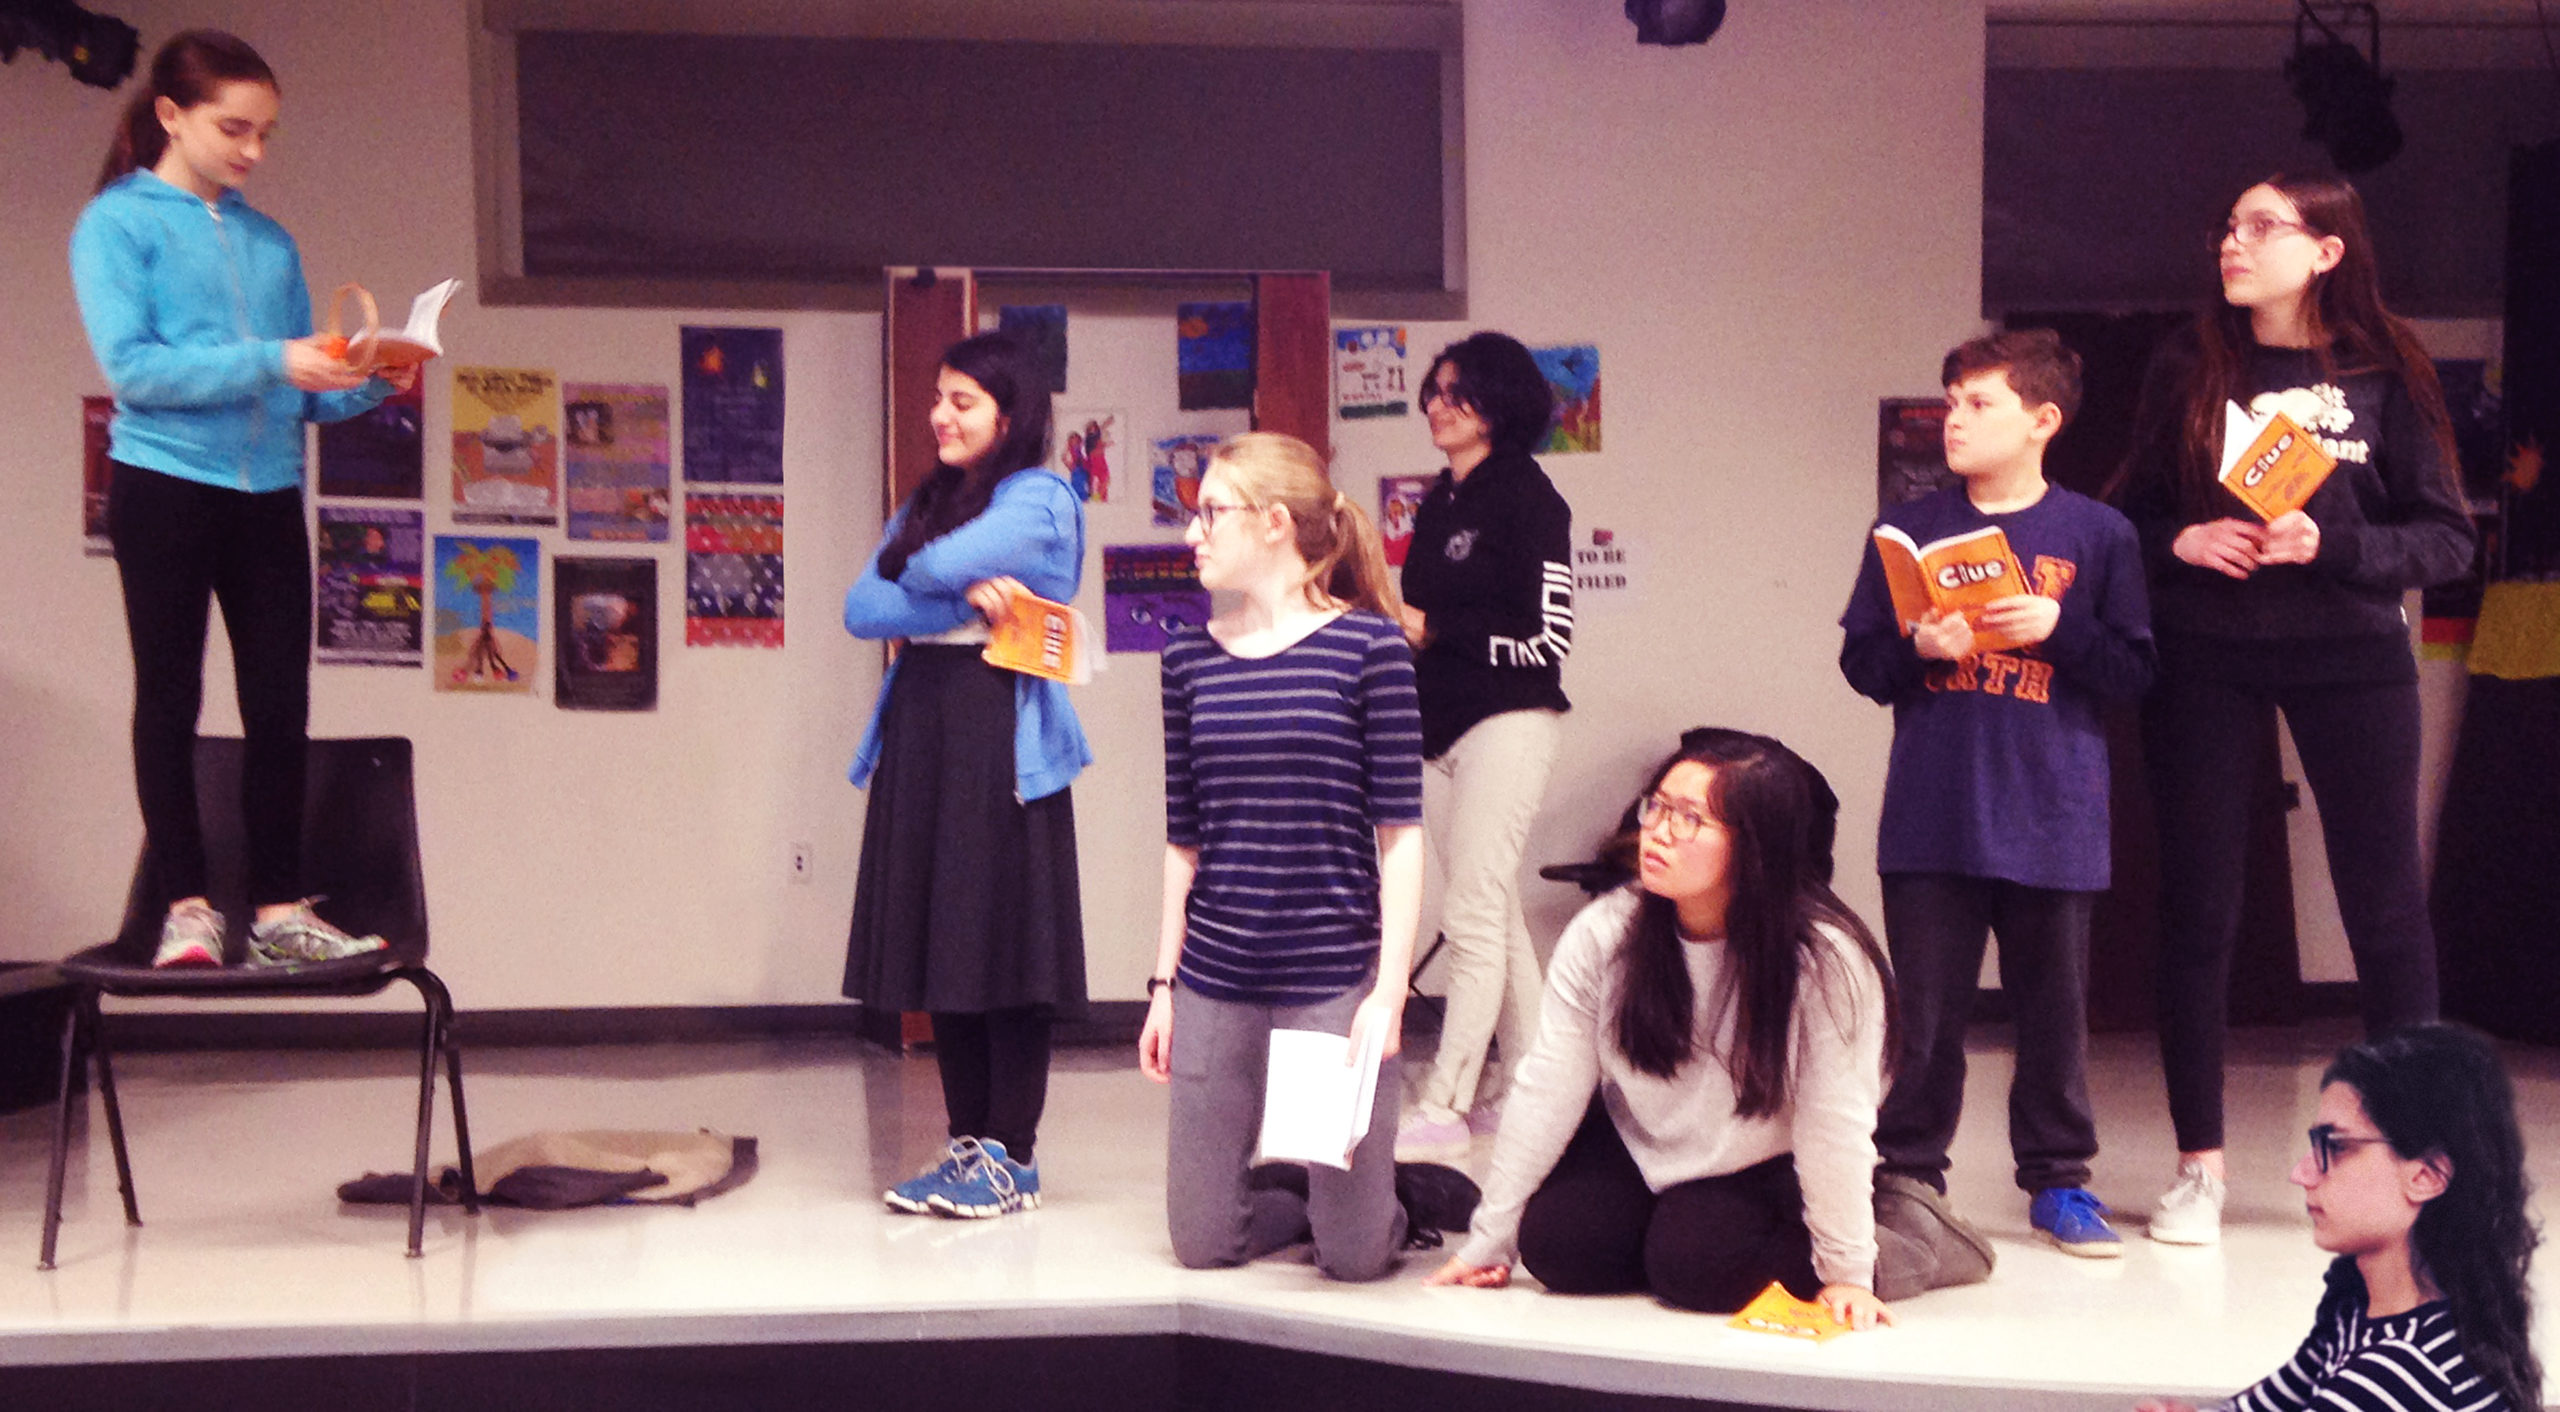 Dana Kagan, Sara Rafaeil, Phoebe Gordon, Sara Chitsaz, Joy Chang, Jack Brenner, Simona Fine and Julian Malater, the cast of “CLUE: The Musical” rehearse for their May and June performances. (Photo courtesy of the Great Neck Library)